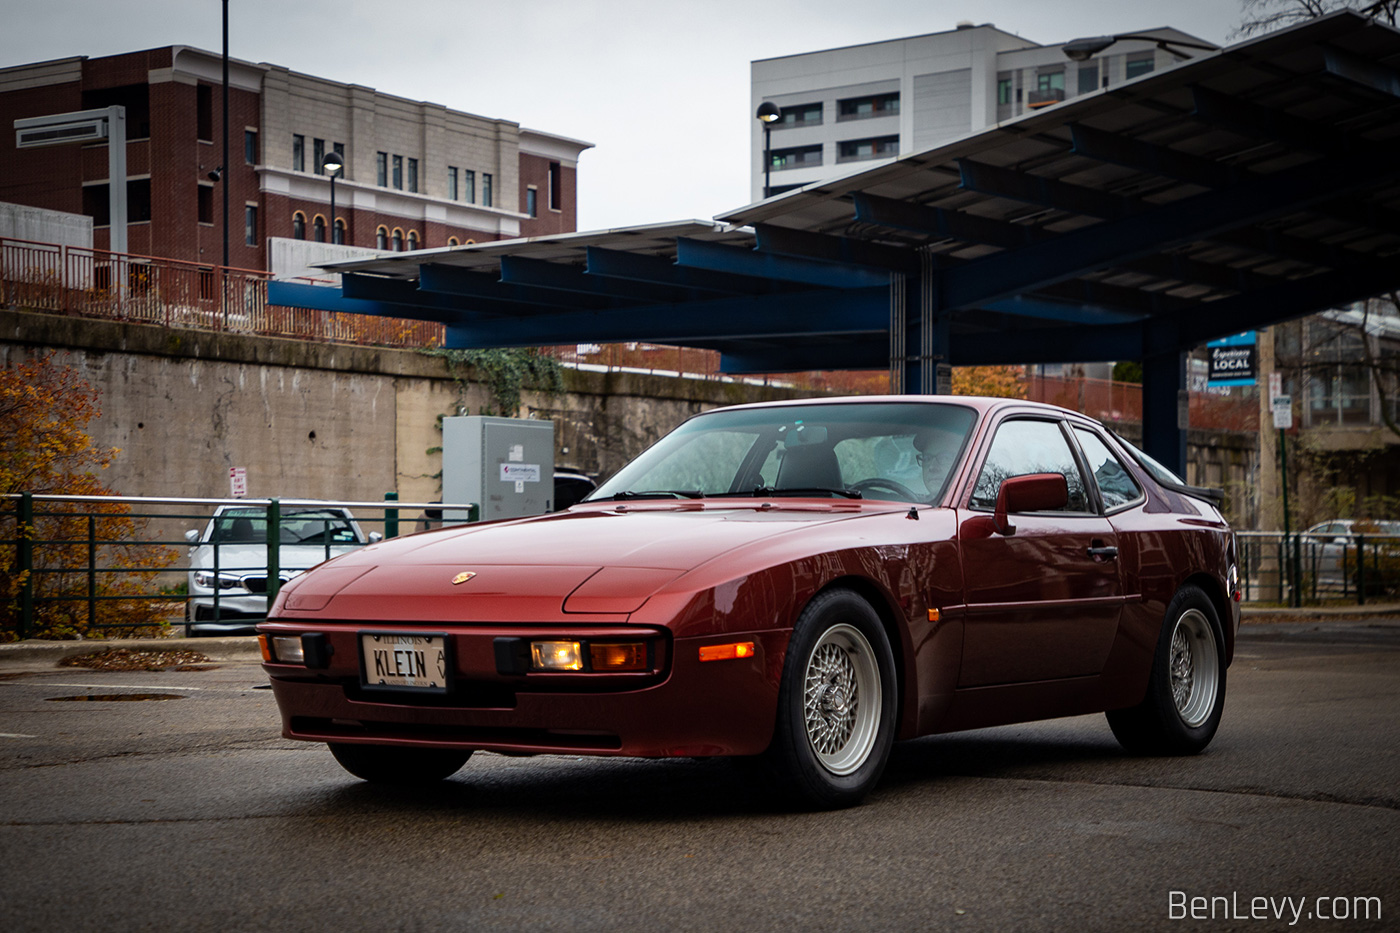 Porsche 944 at Oak Park Cars and Coffee